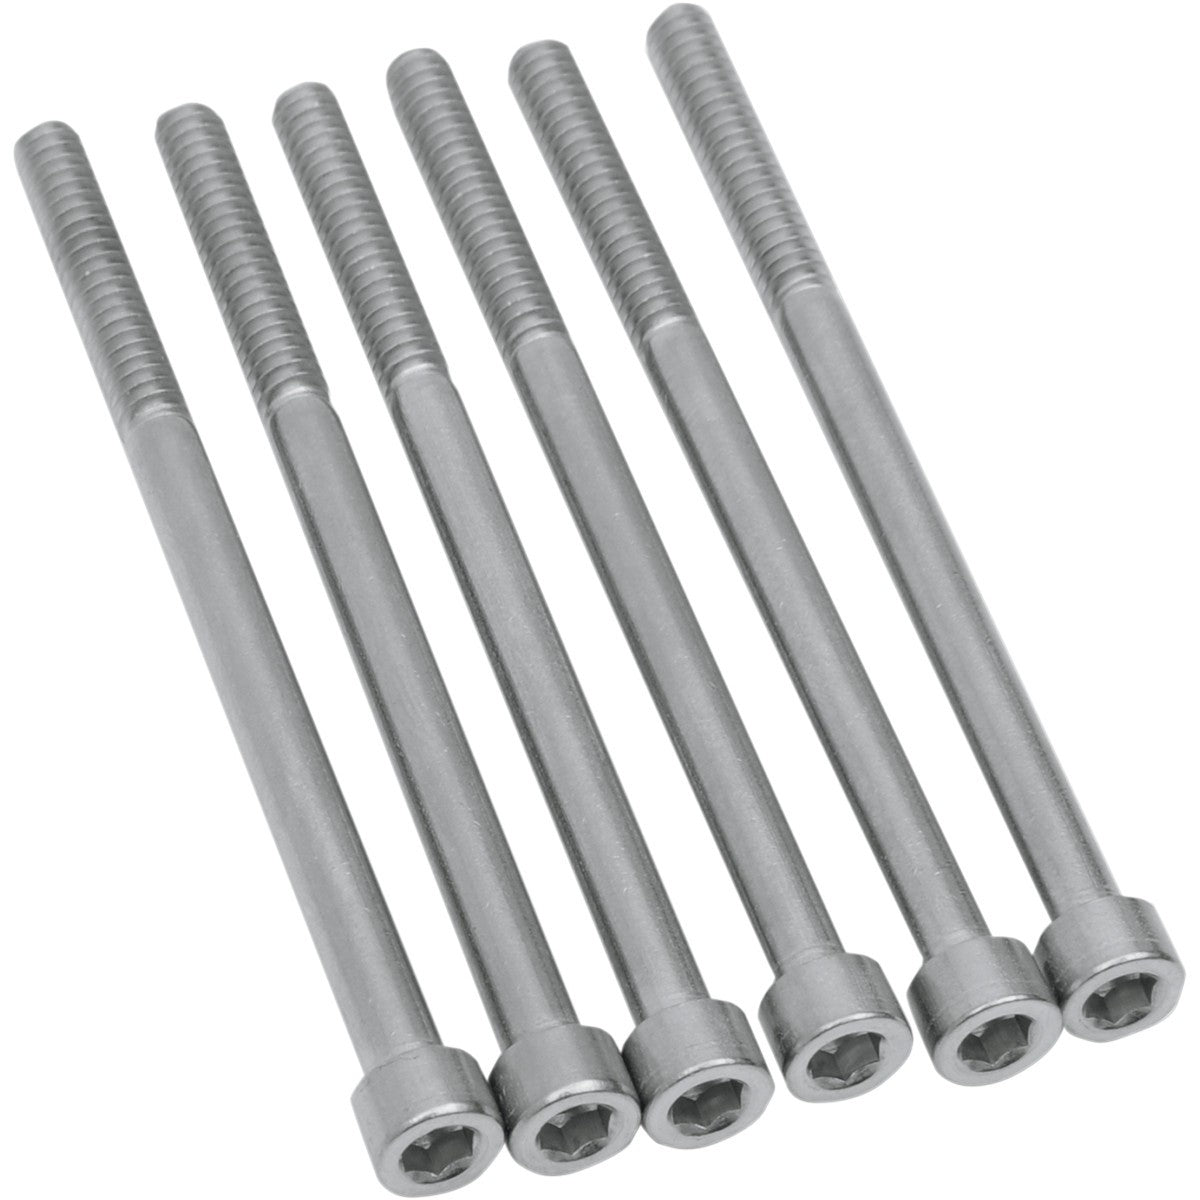 Supertrapp Exhaust Stainless Steel Bolt 6 Pack Hold 15-34 Disc - Peakboys